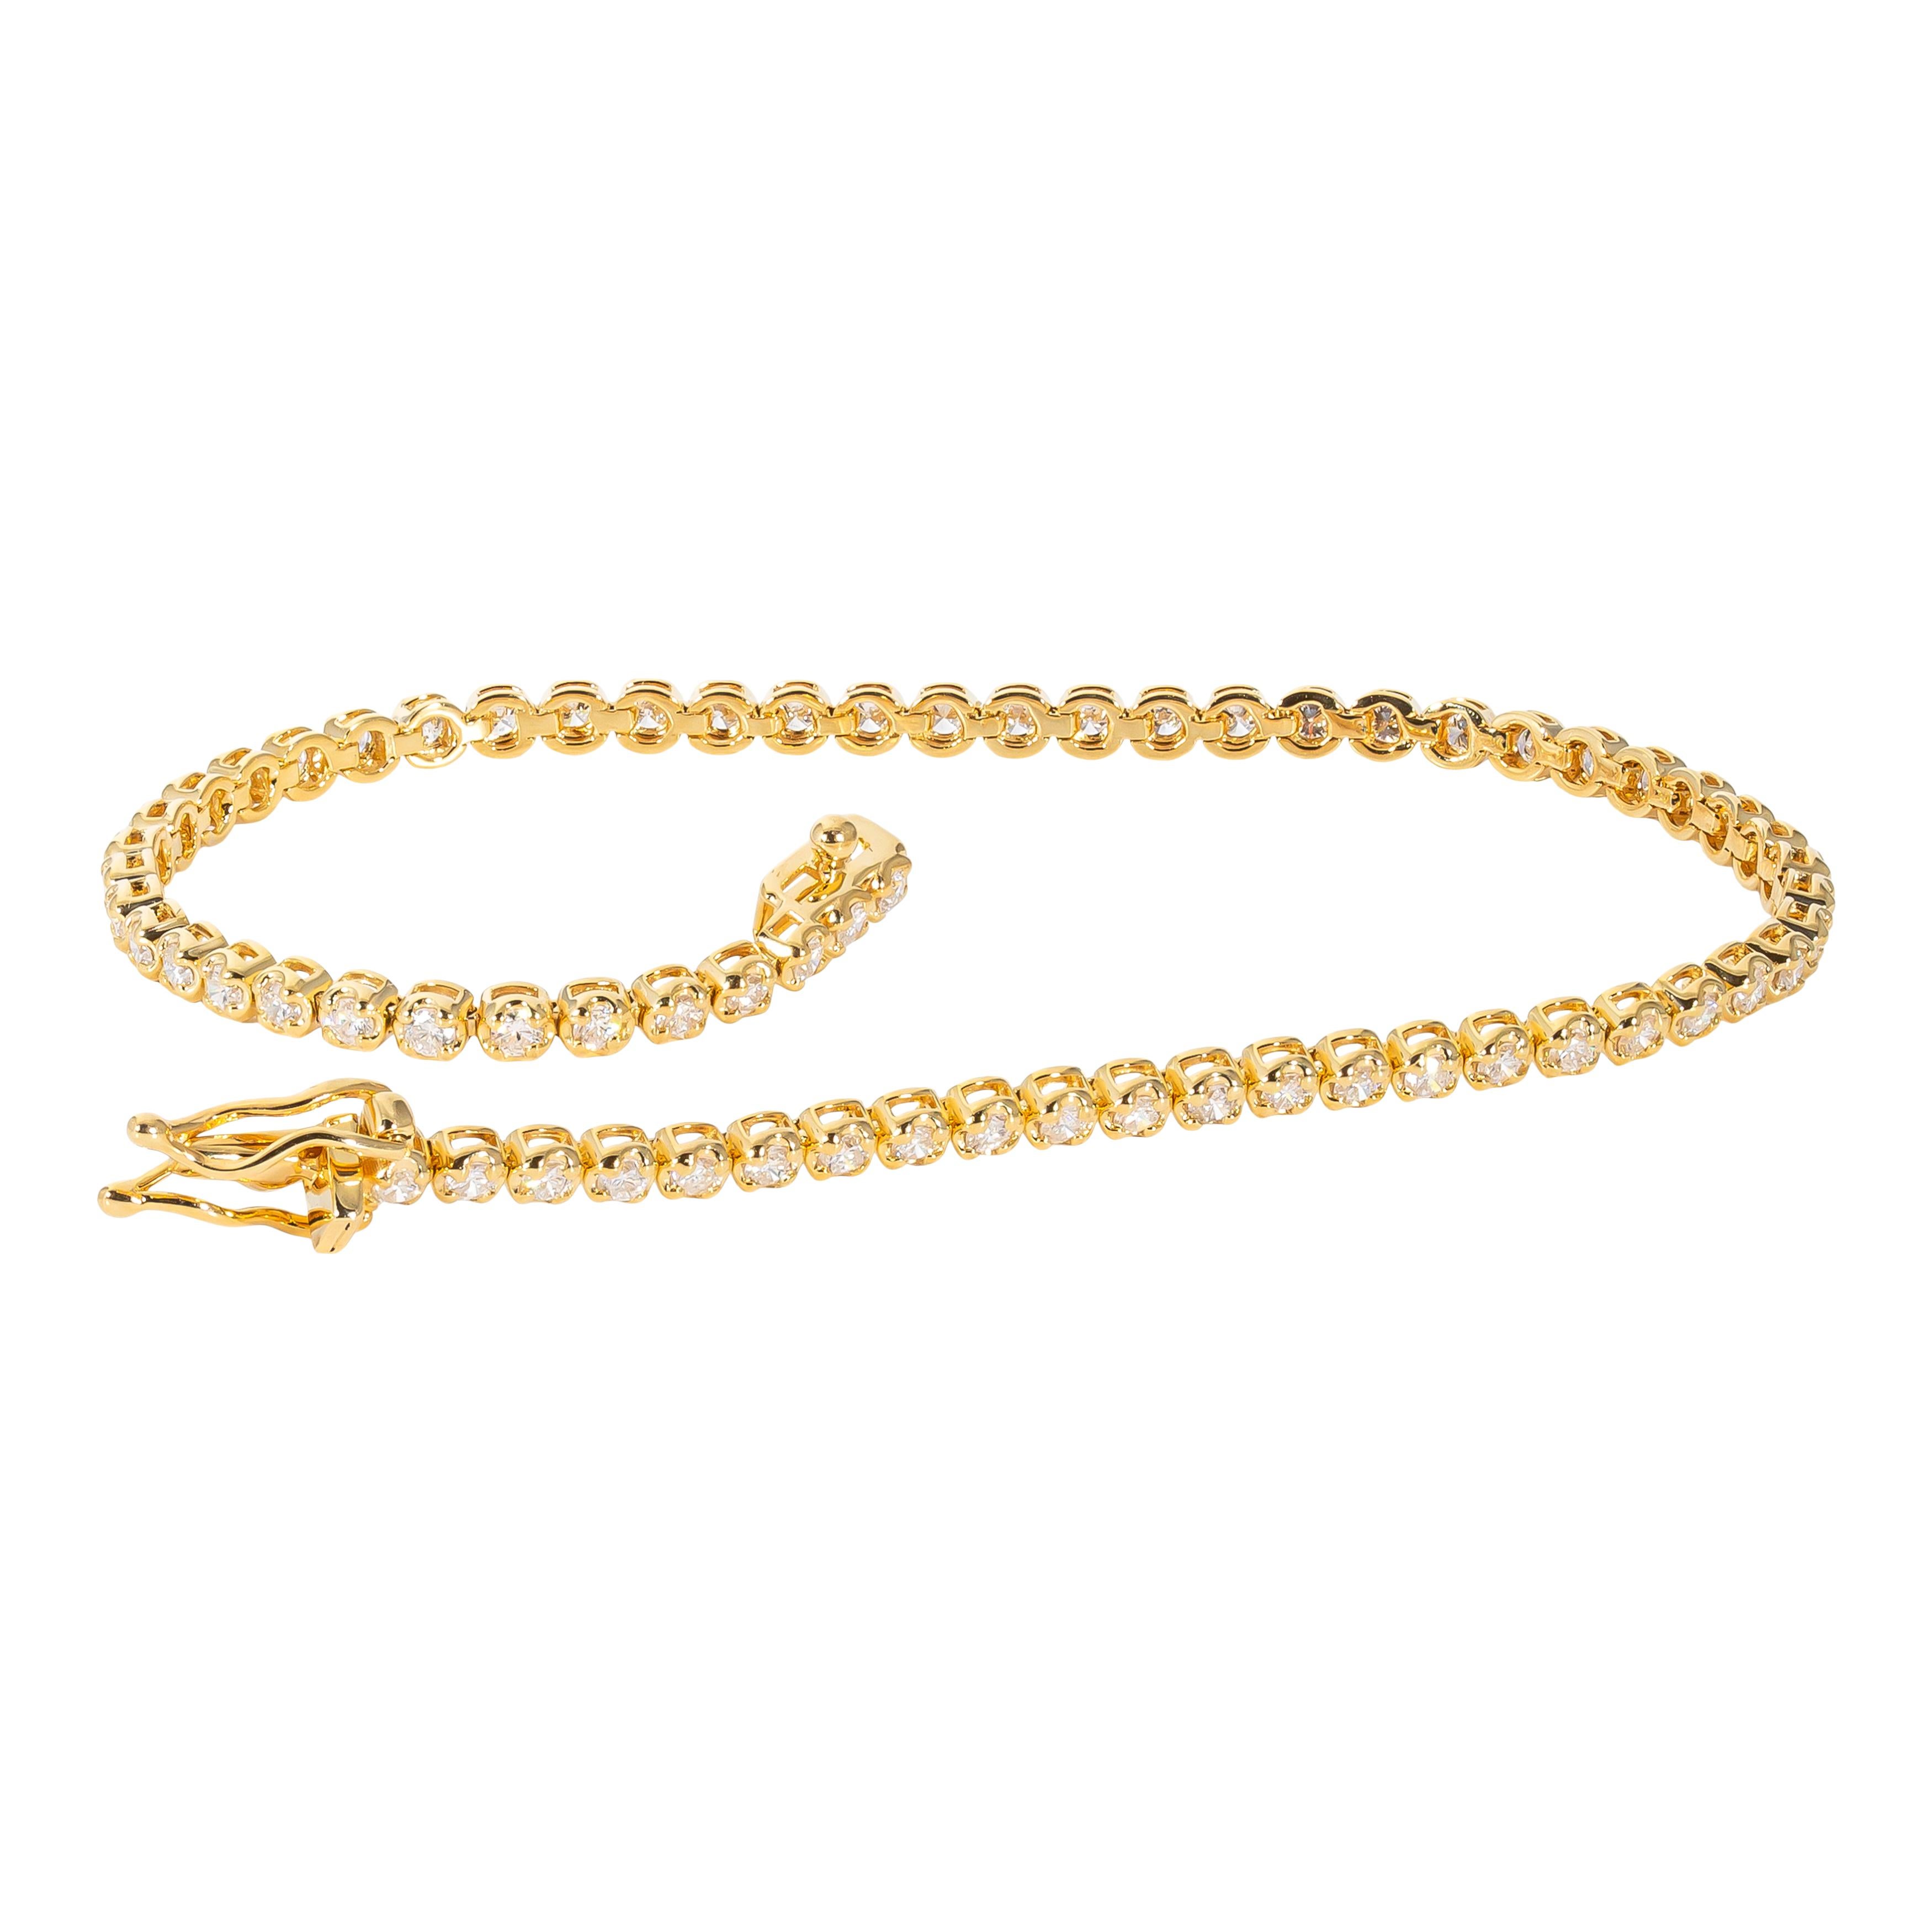 14k yellow gold bracelet containing prong set natural diamonds. The total weight of the diamonds is 1.49 carats. The color and clarity grades of the diamonds contained within the bracelet have been graded by our Graduate Gemologists as G-H, VS2-SI1,